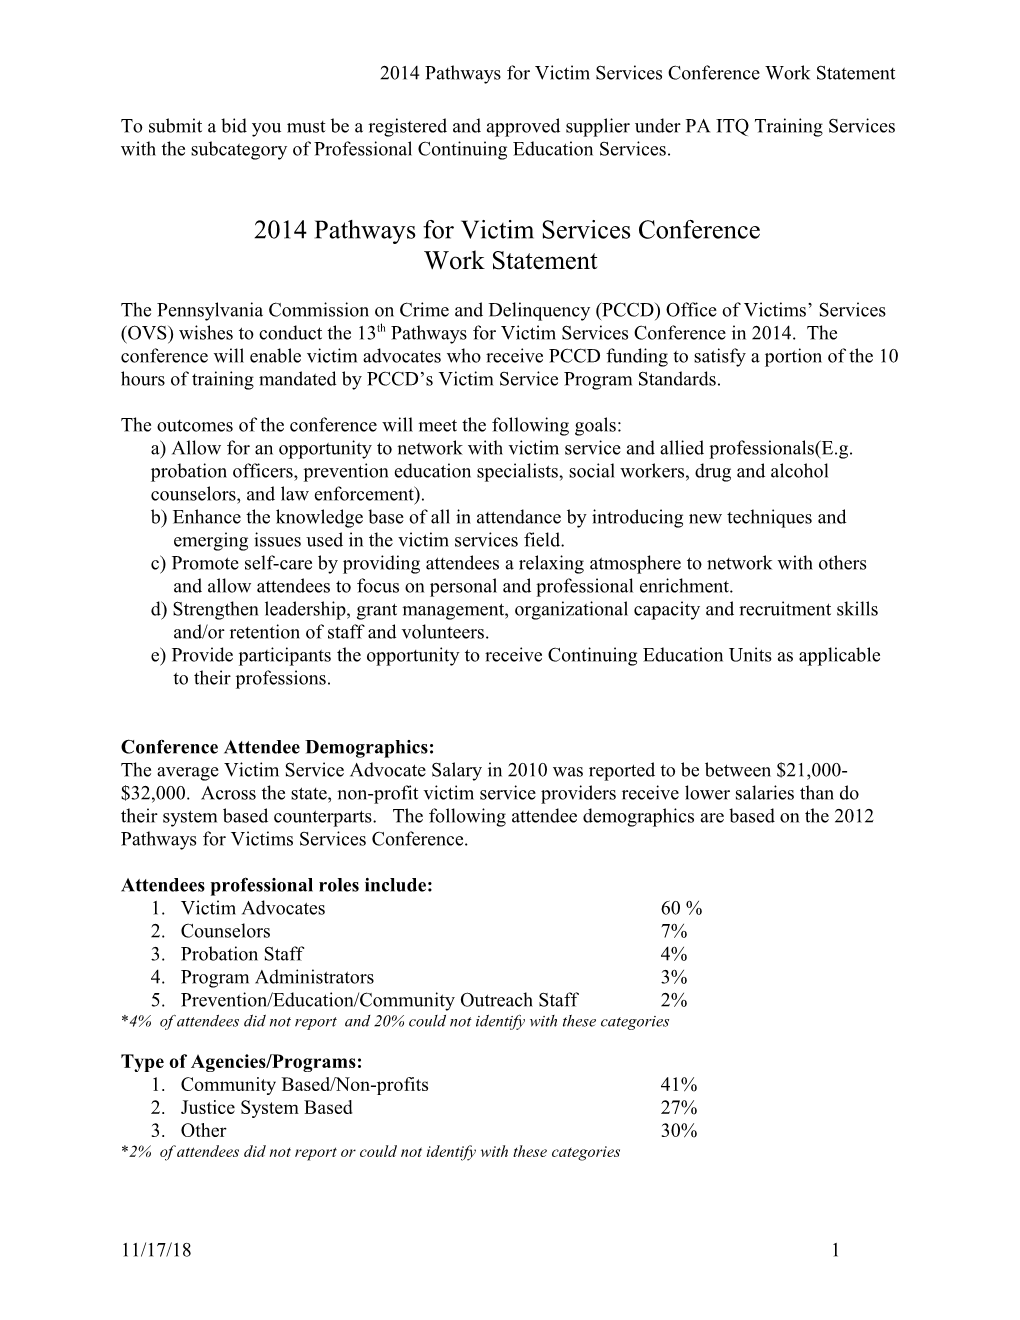 2008 Pathways for Victim Services Conference